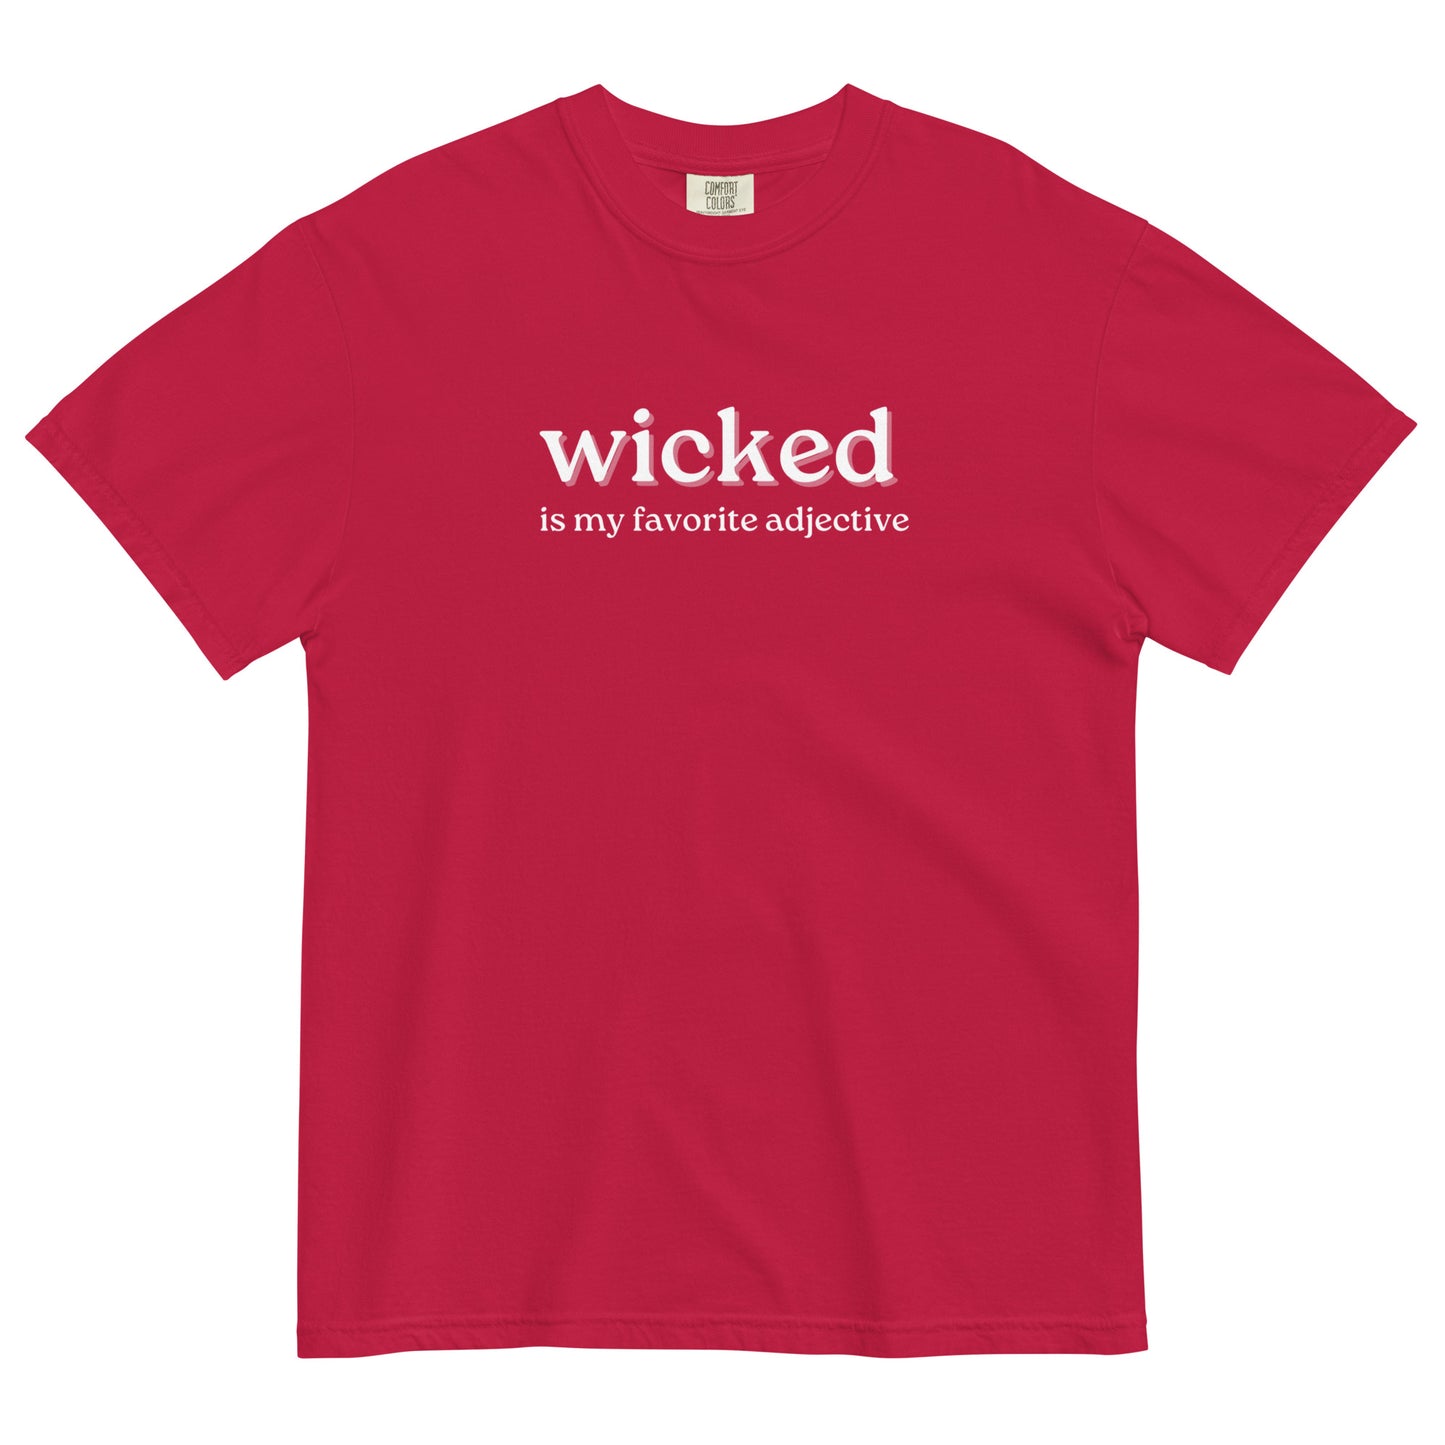 red tshirt that says "wicked is my favorite adjective" in white lettering